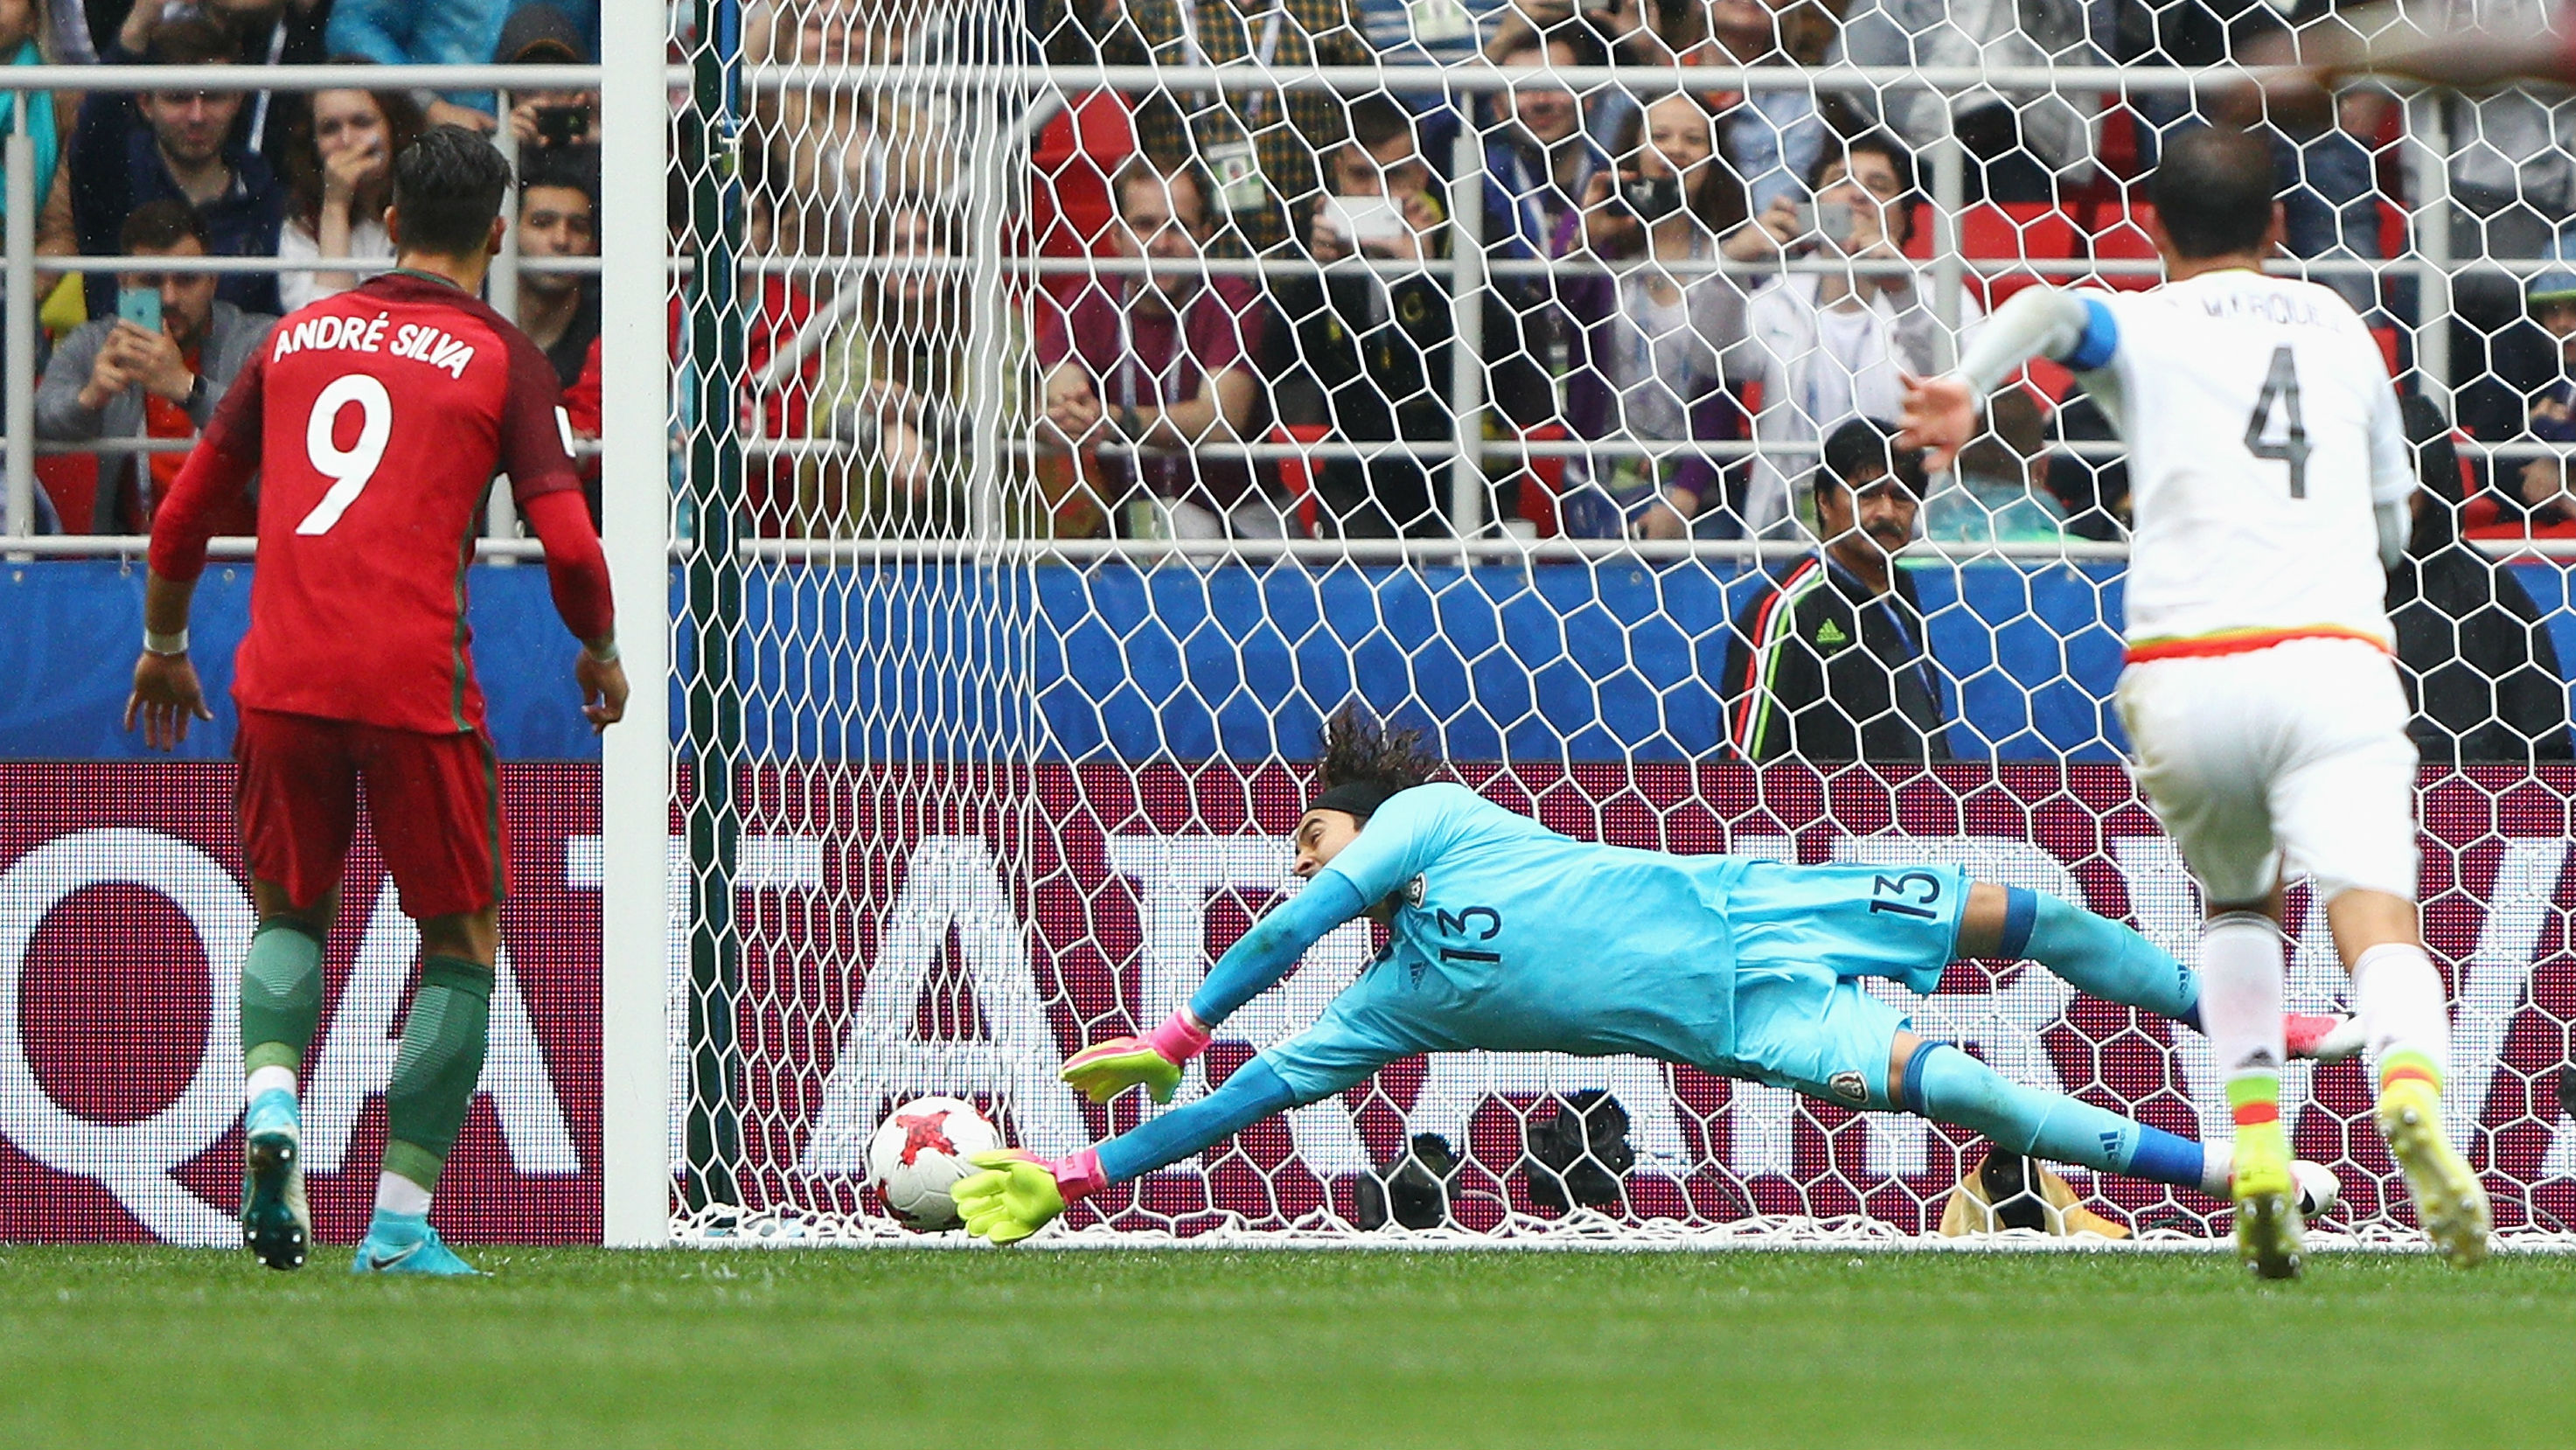 Confederations Cup Guillermo Ochoa deserves move within Europe after